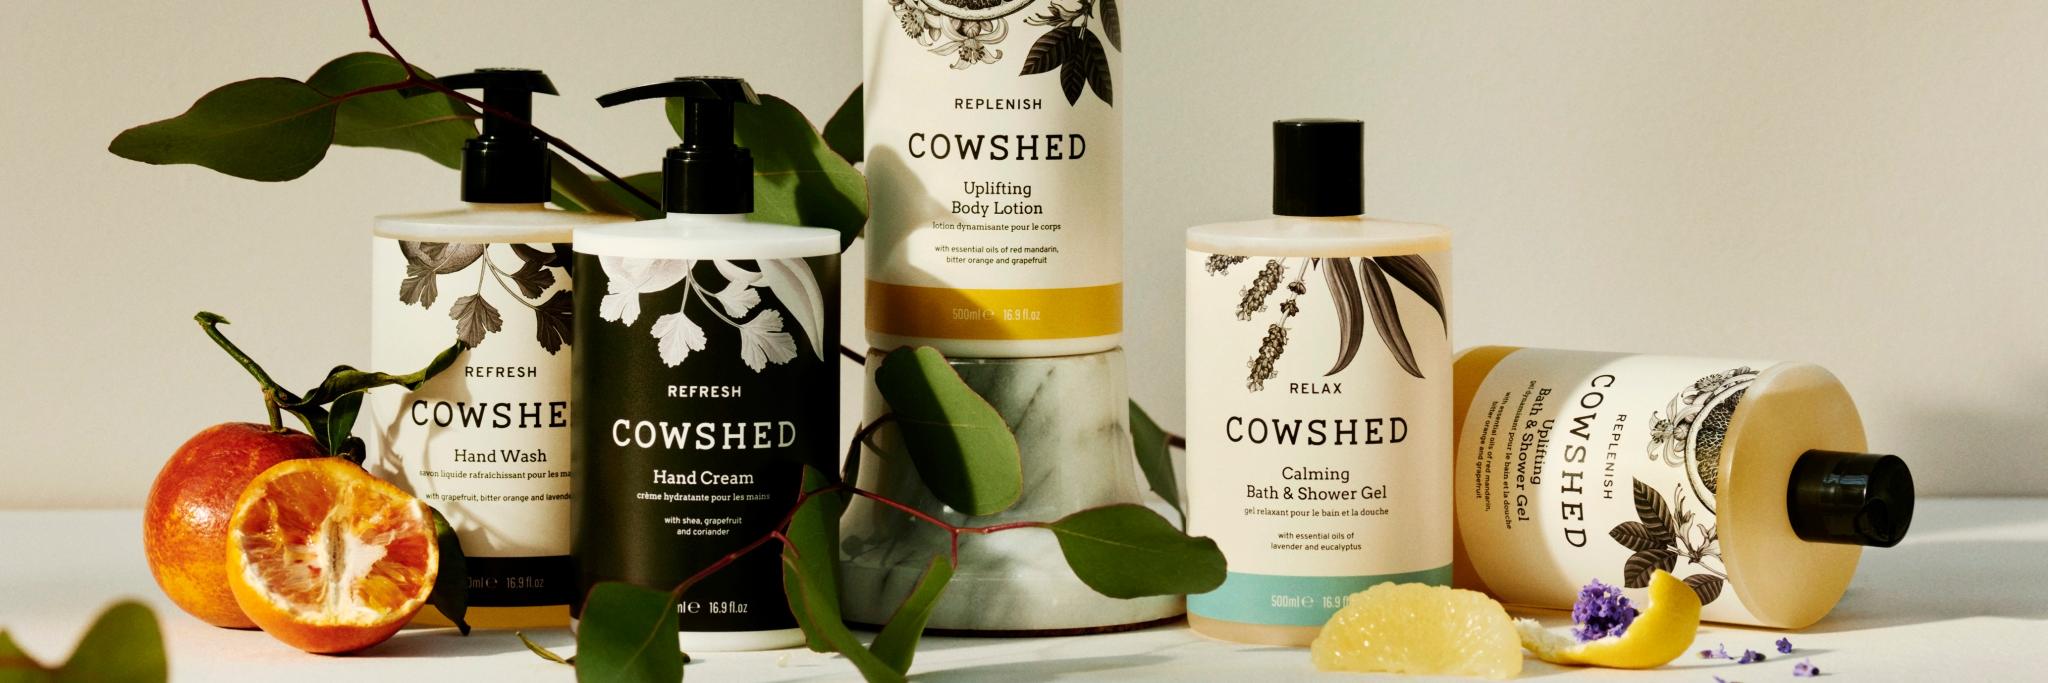 thecowshed